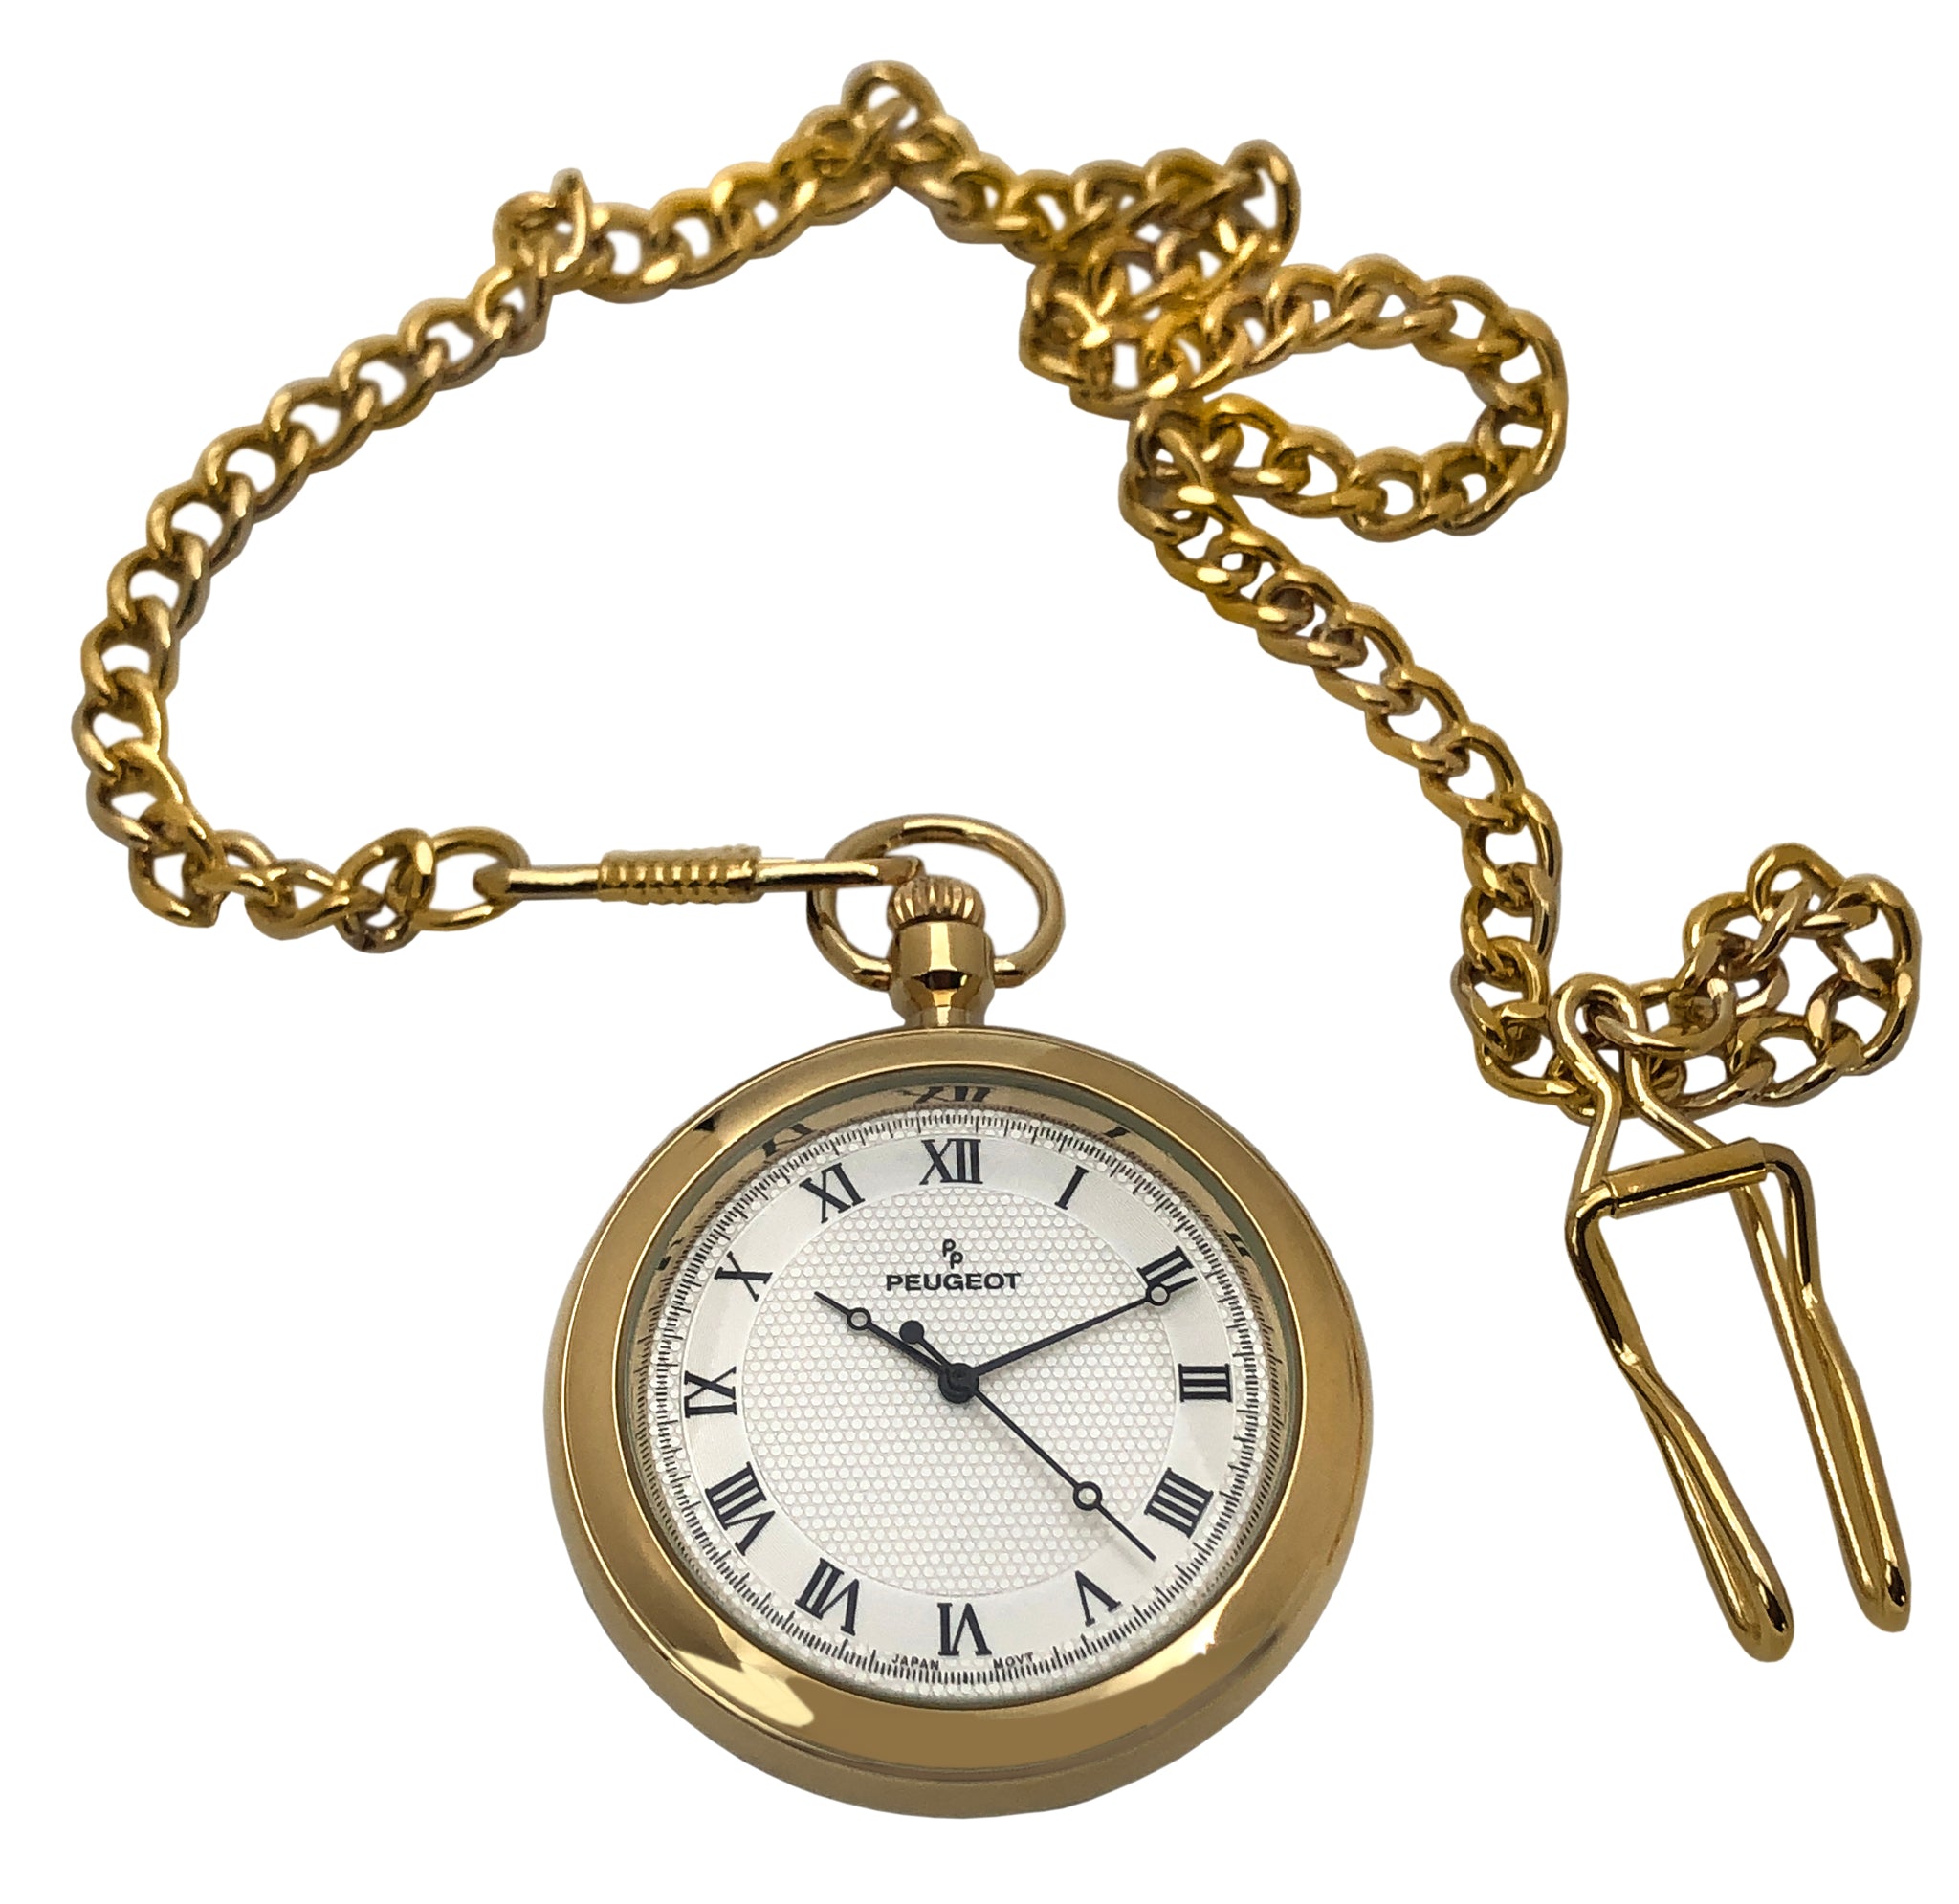 golden pocket watch with chain